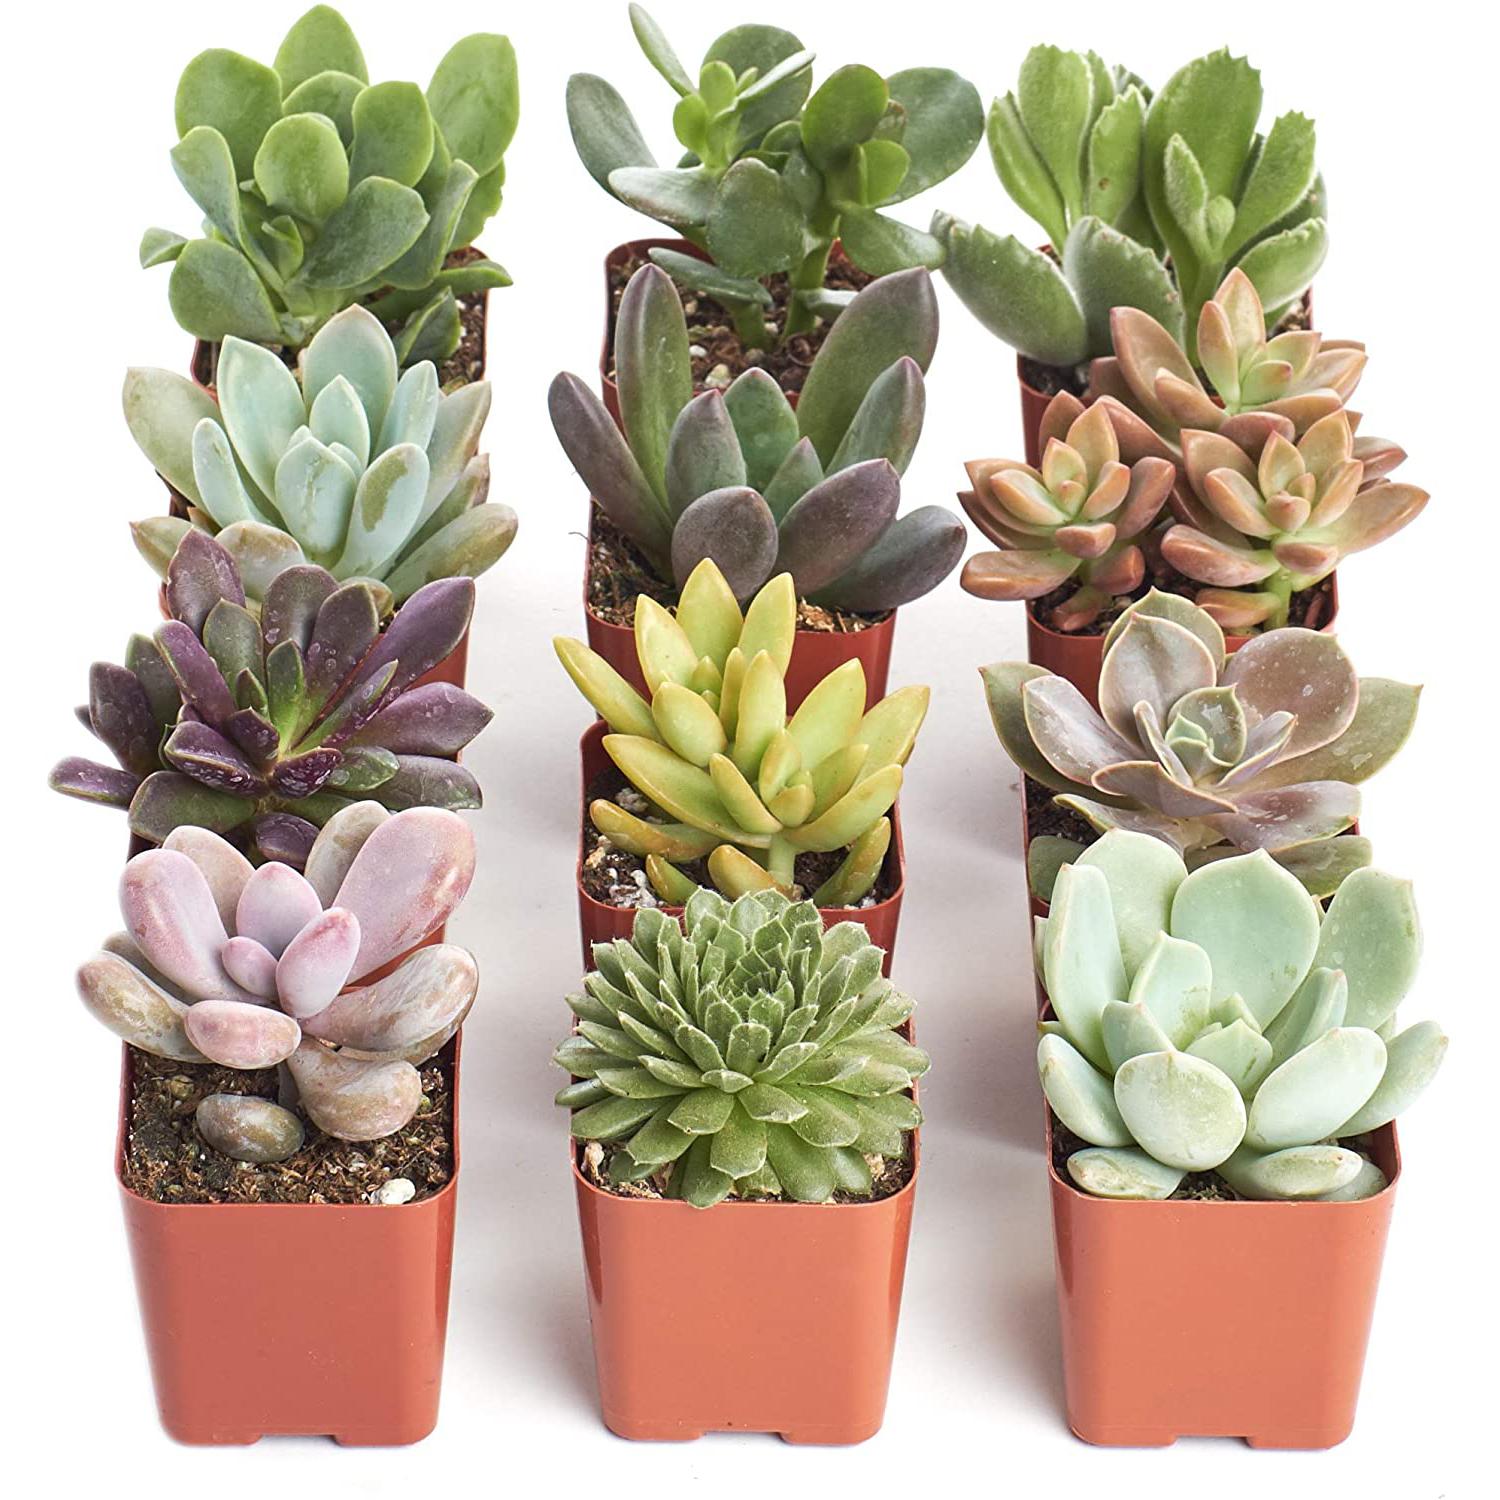 12 Pack of Succulent Plants for $23.99